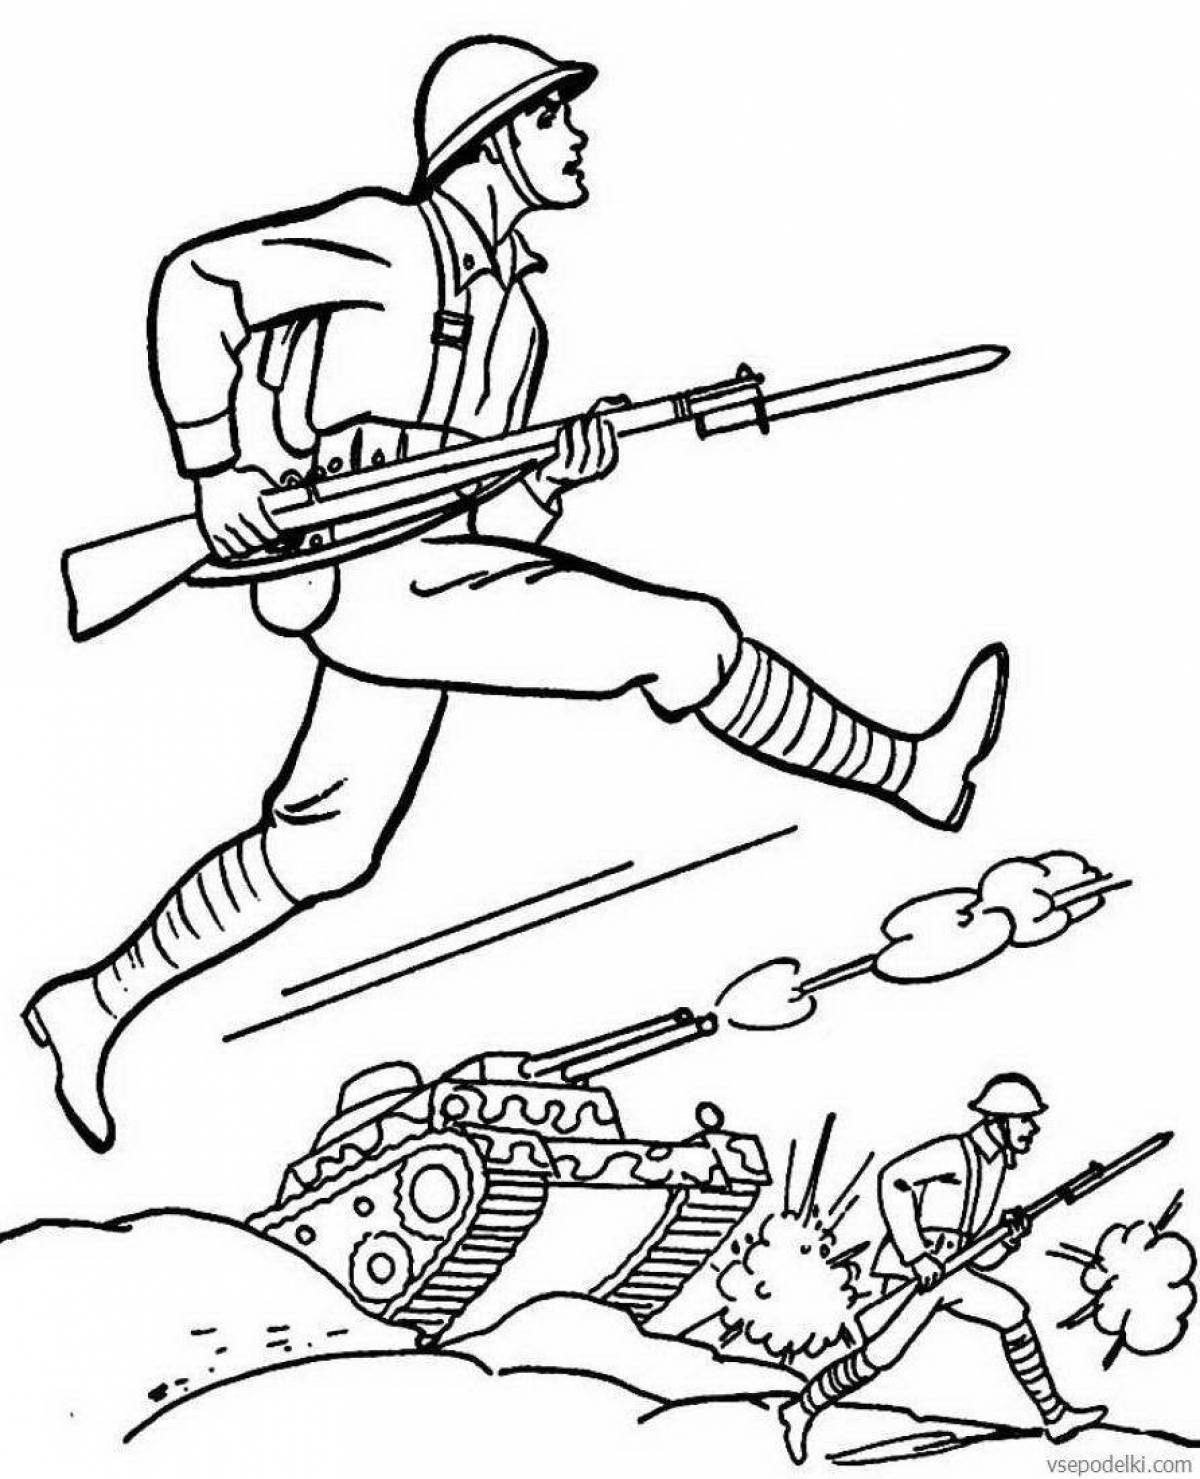 Funny toy soldier coloring book for 3-4 year olds